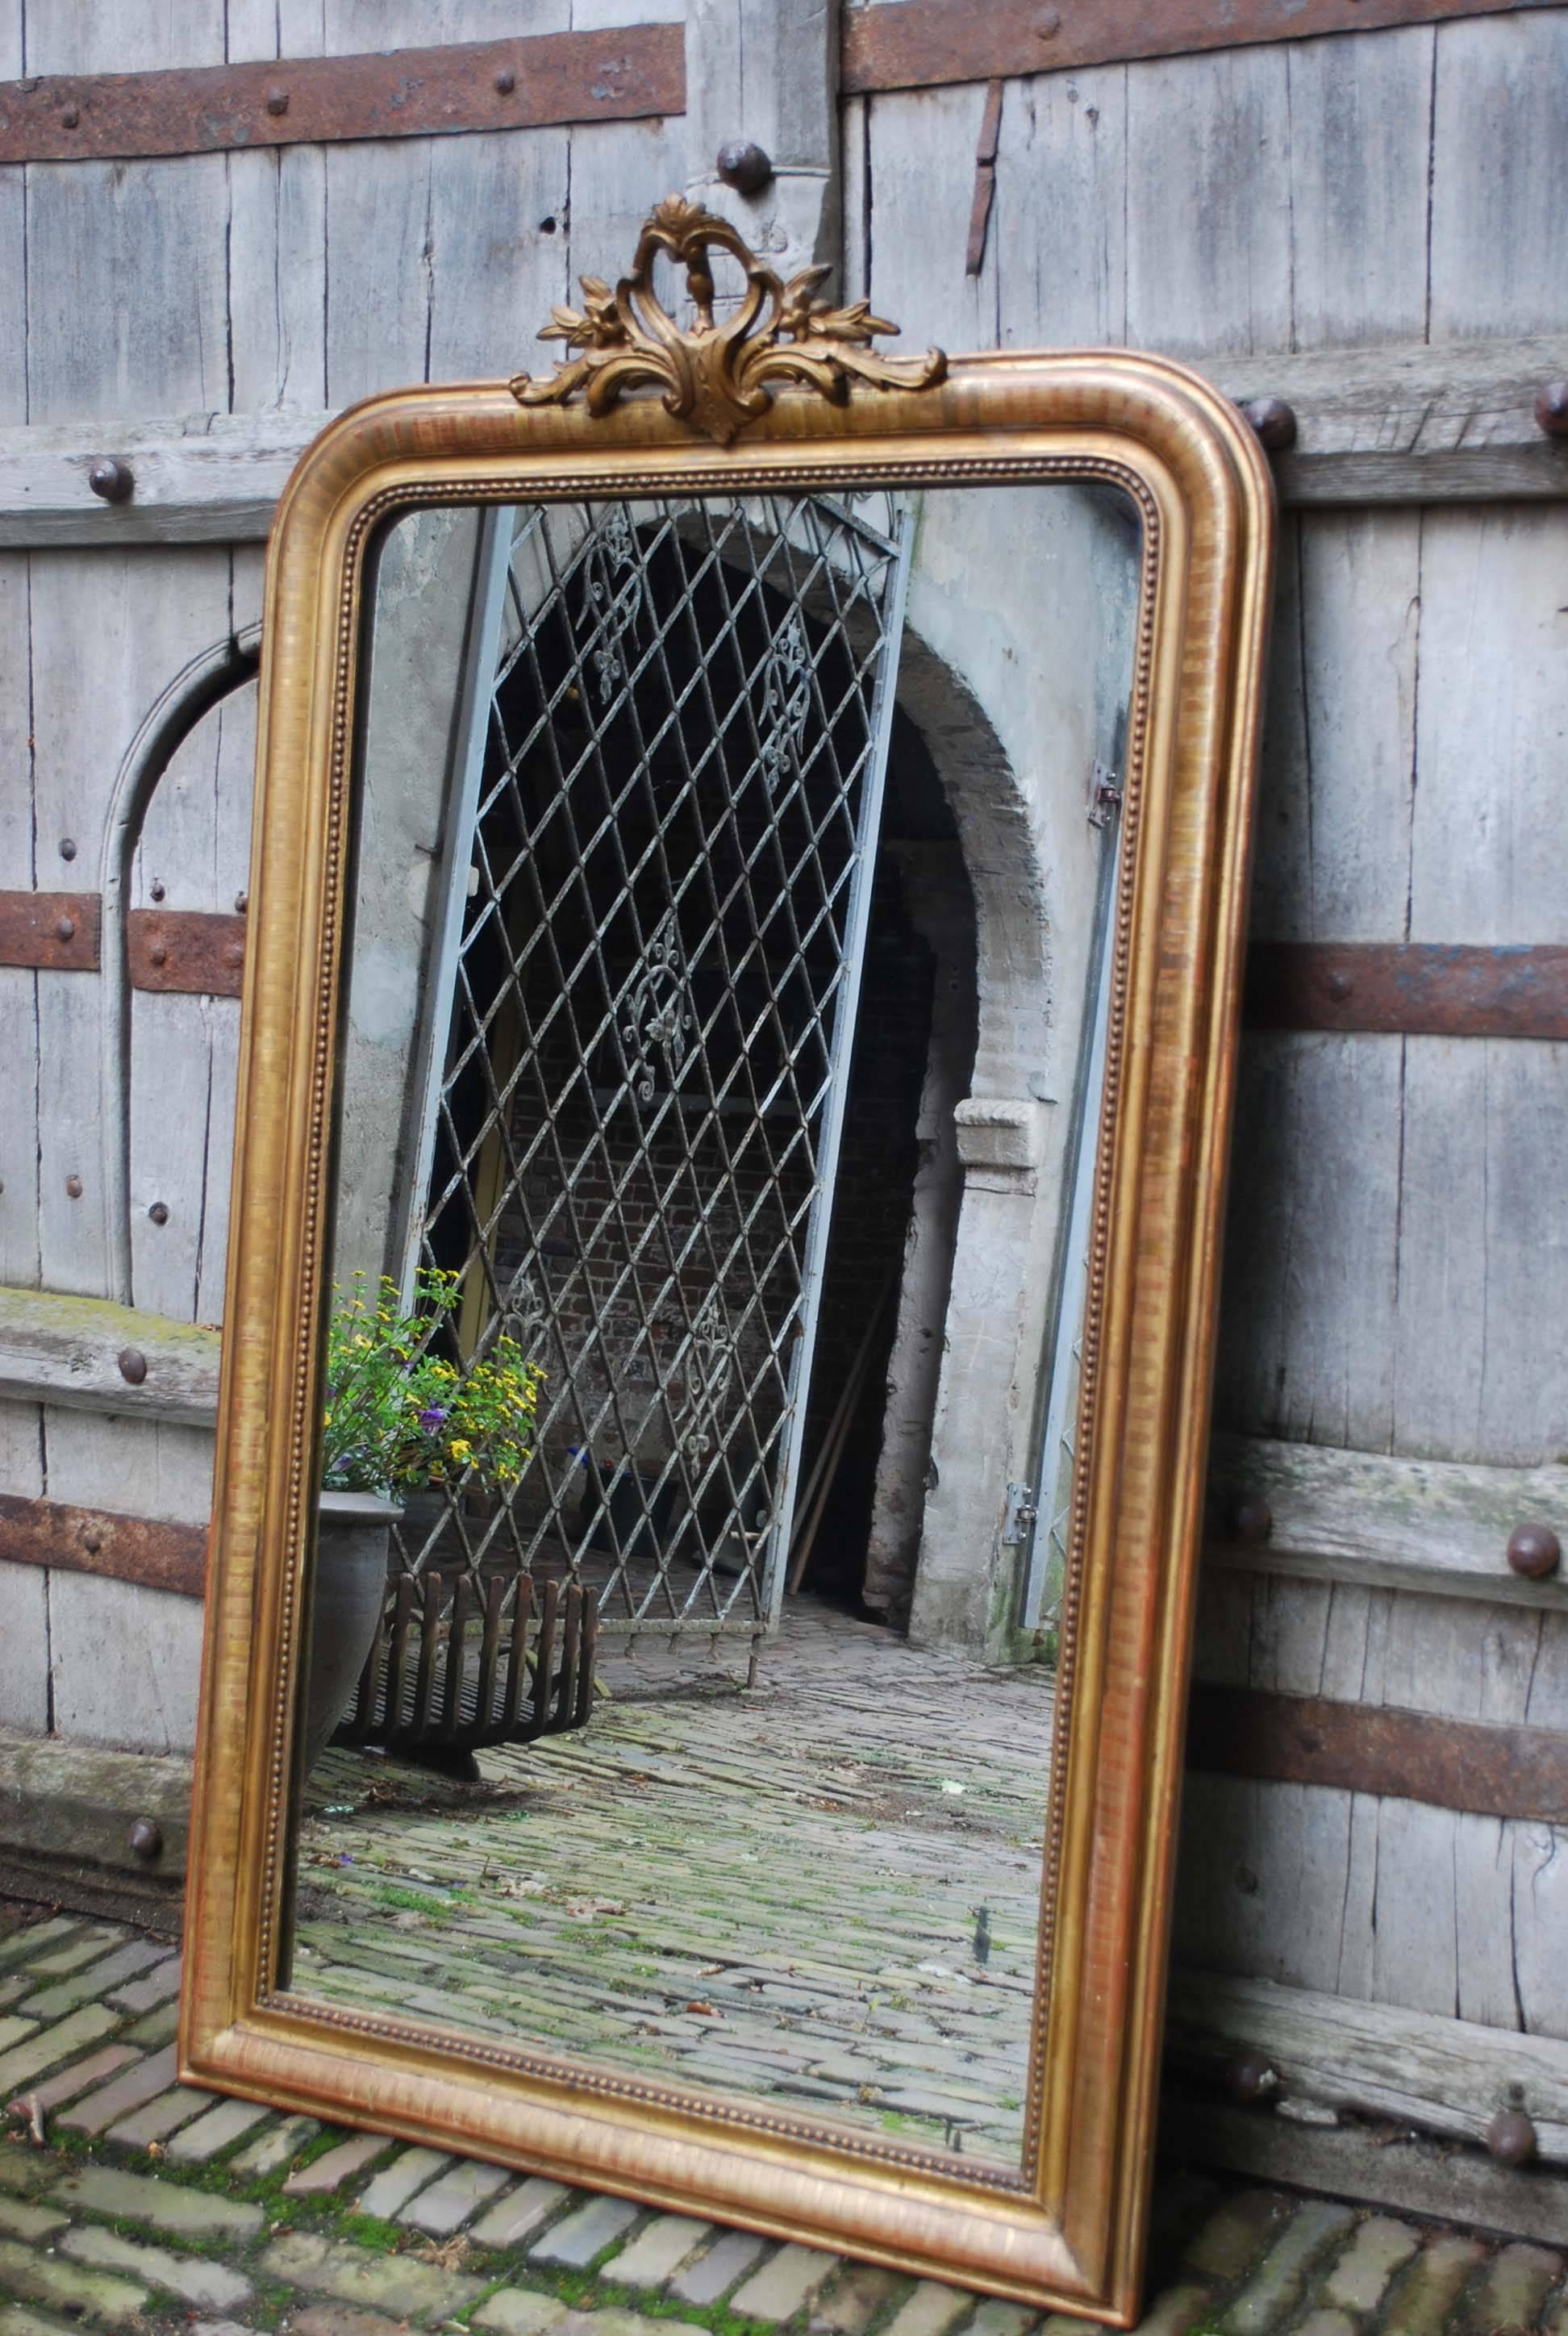 19th century gold gilded baroque mirror. 
Originates France, dating circa 1880. 
(Shipping costs on request, depends on destination).